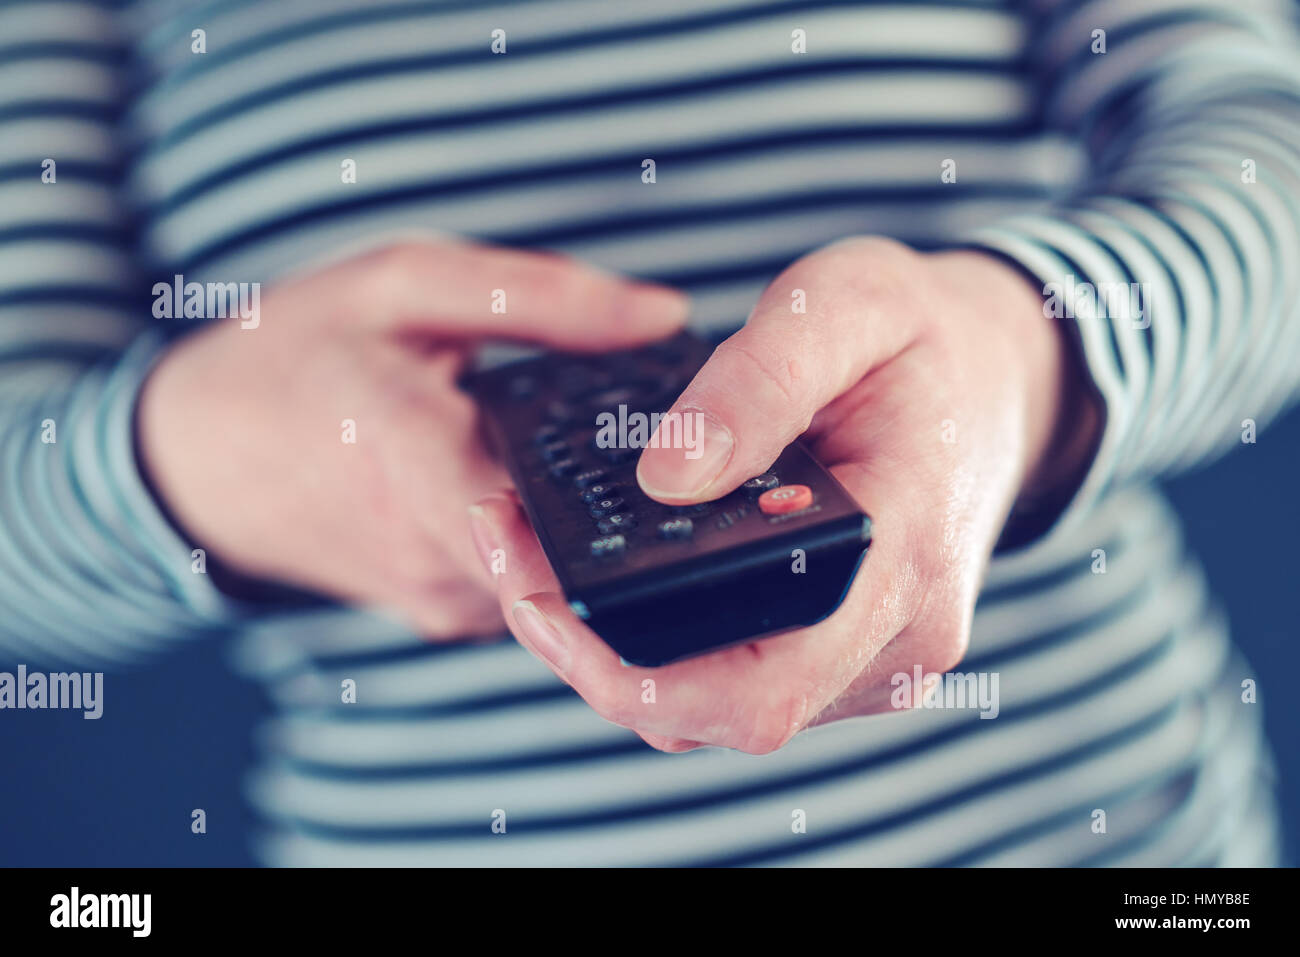 Television remote control in female hands pointing to tv set and turning it on or off Stock Photo